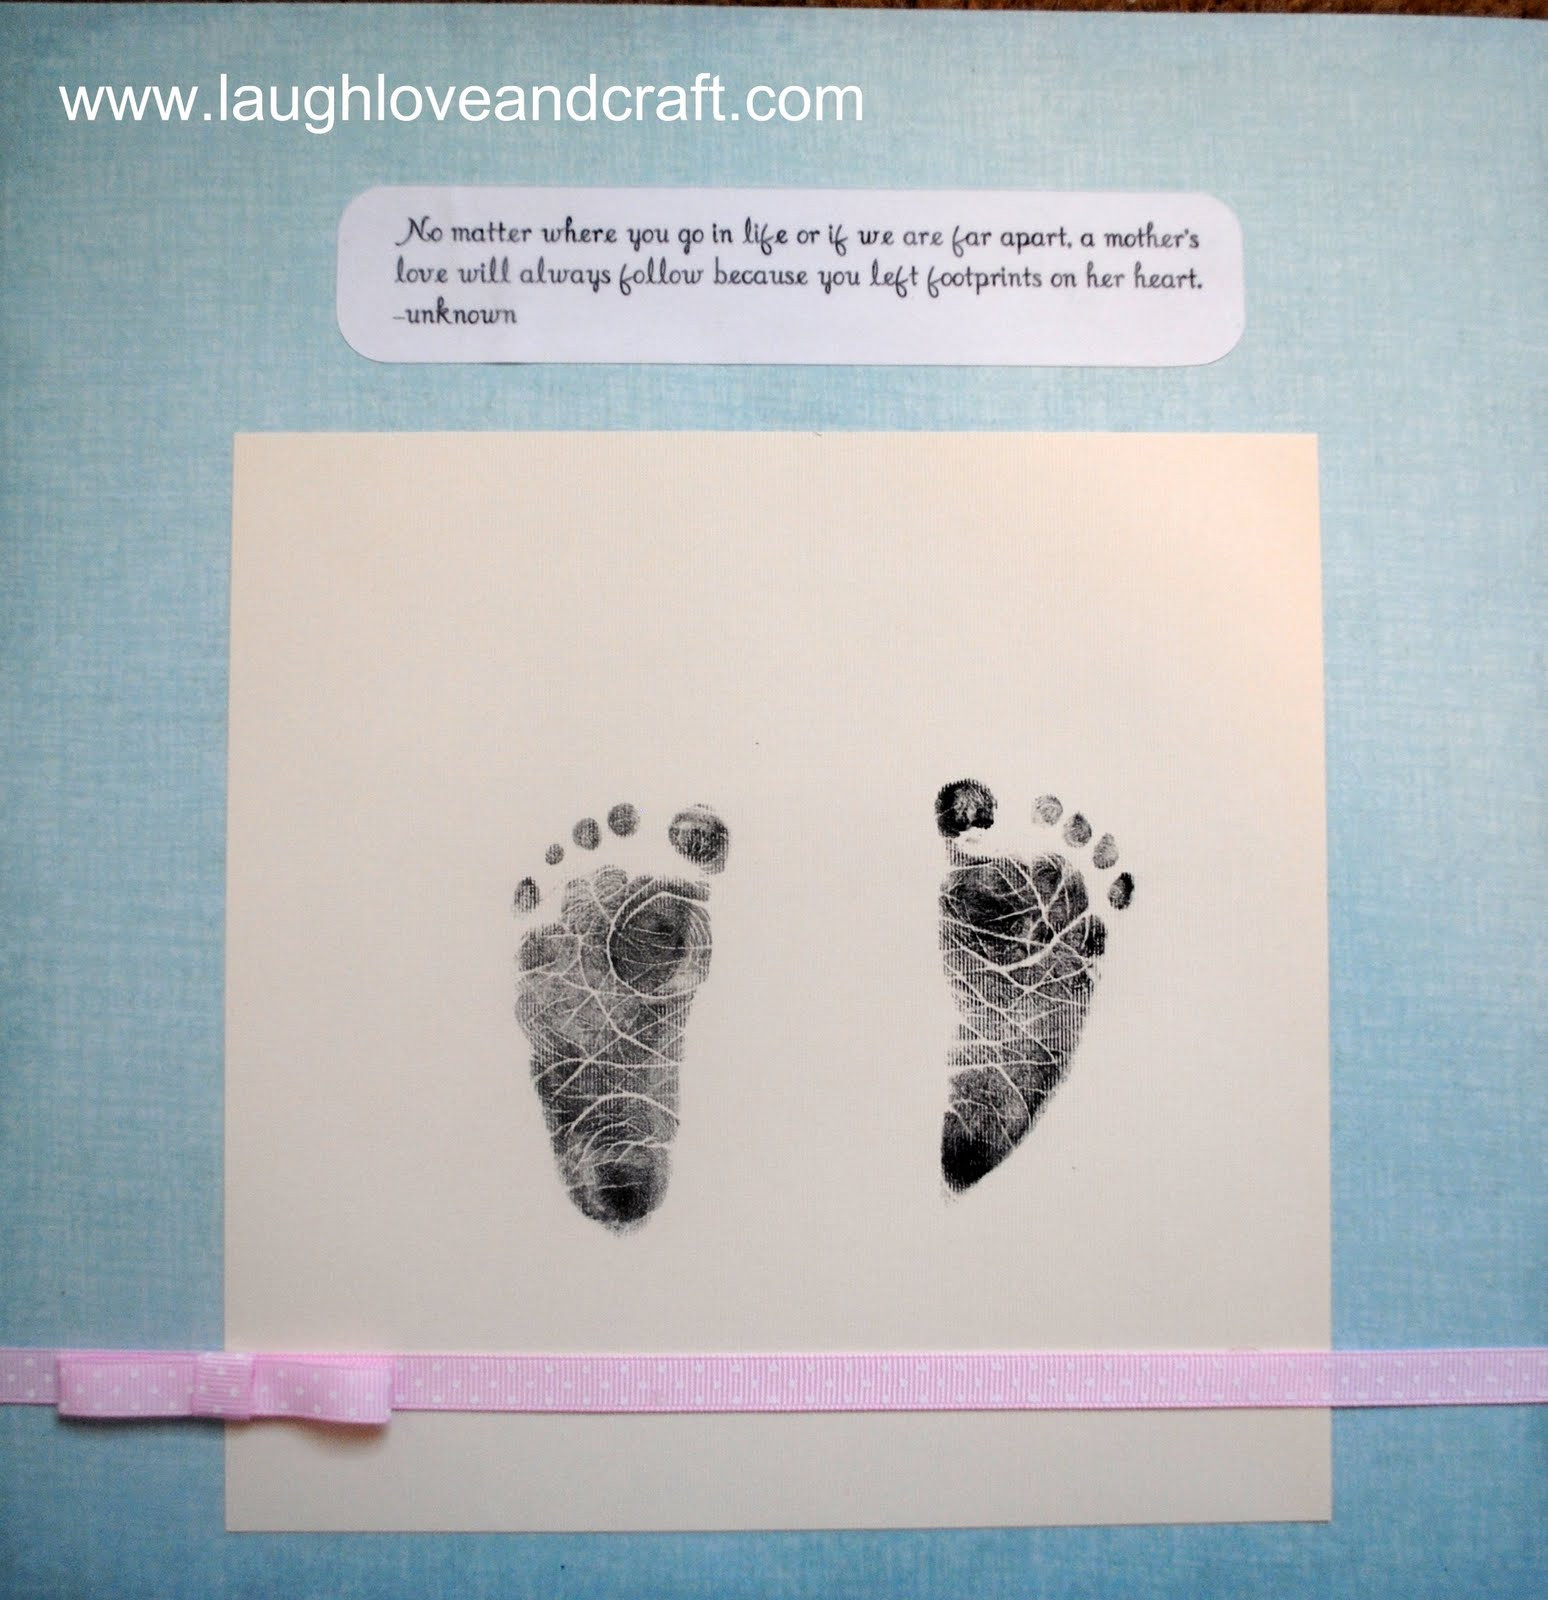 Footprint Quotes For Baby
 Footprint Quotes And Sayings QuotesGram